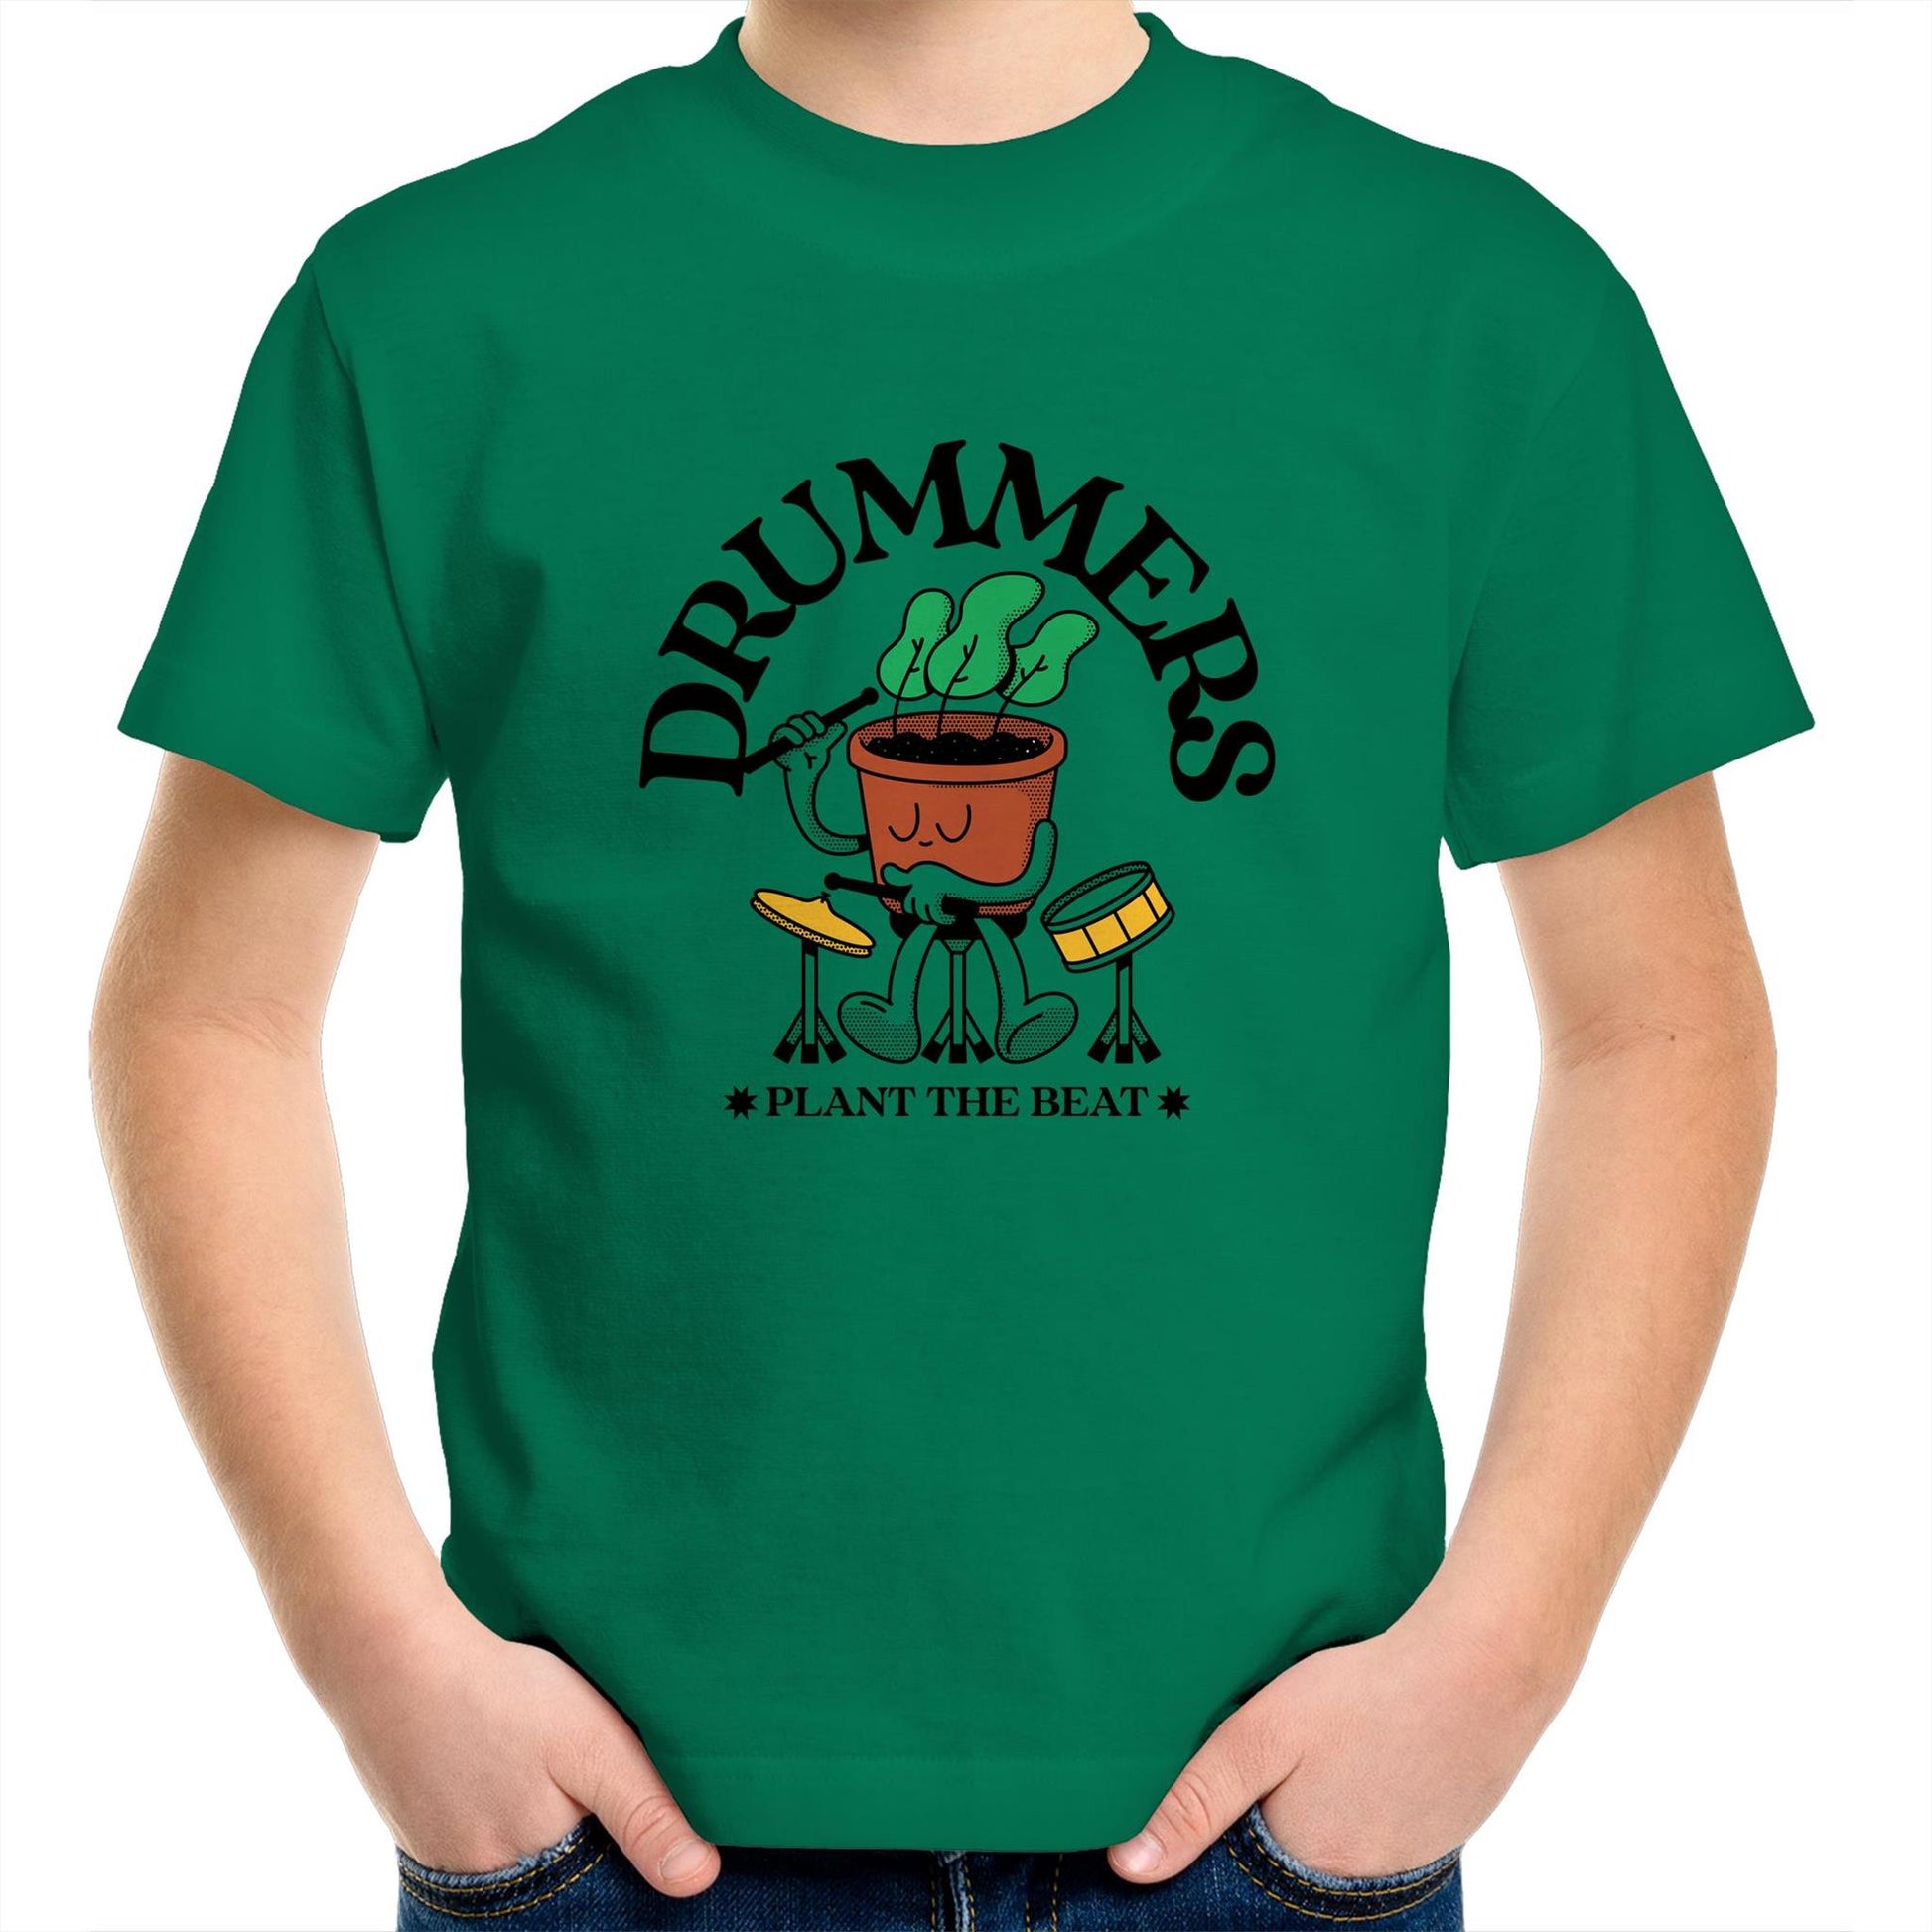 Drummers - Kids Youth Crew T-Shirt Kelly Green Kids Youth T-shirt Music Plants